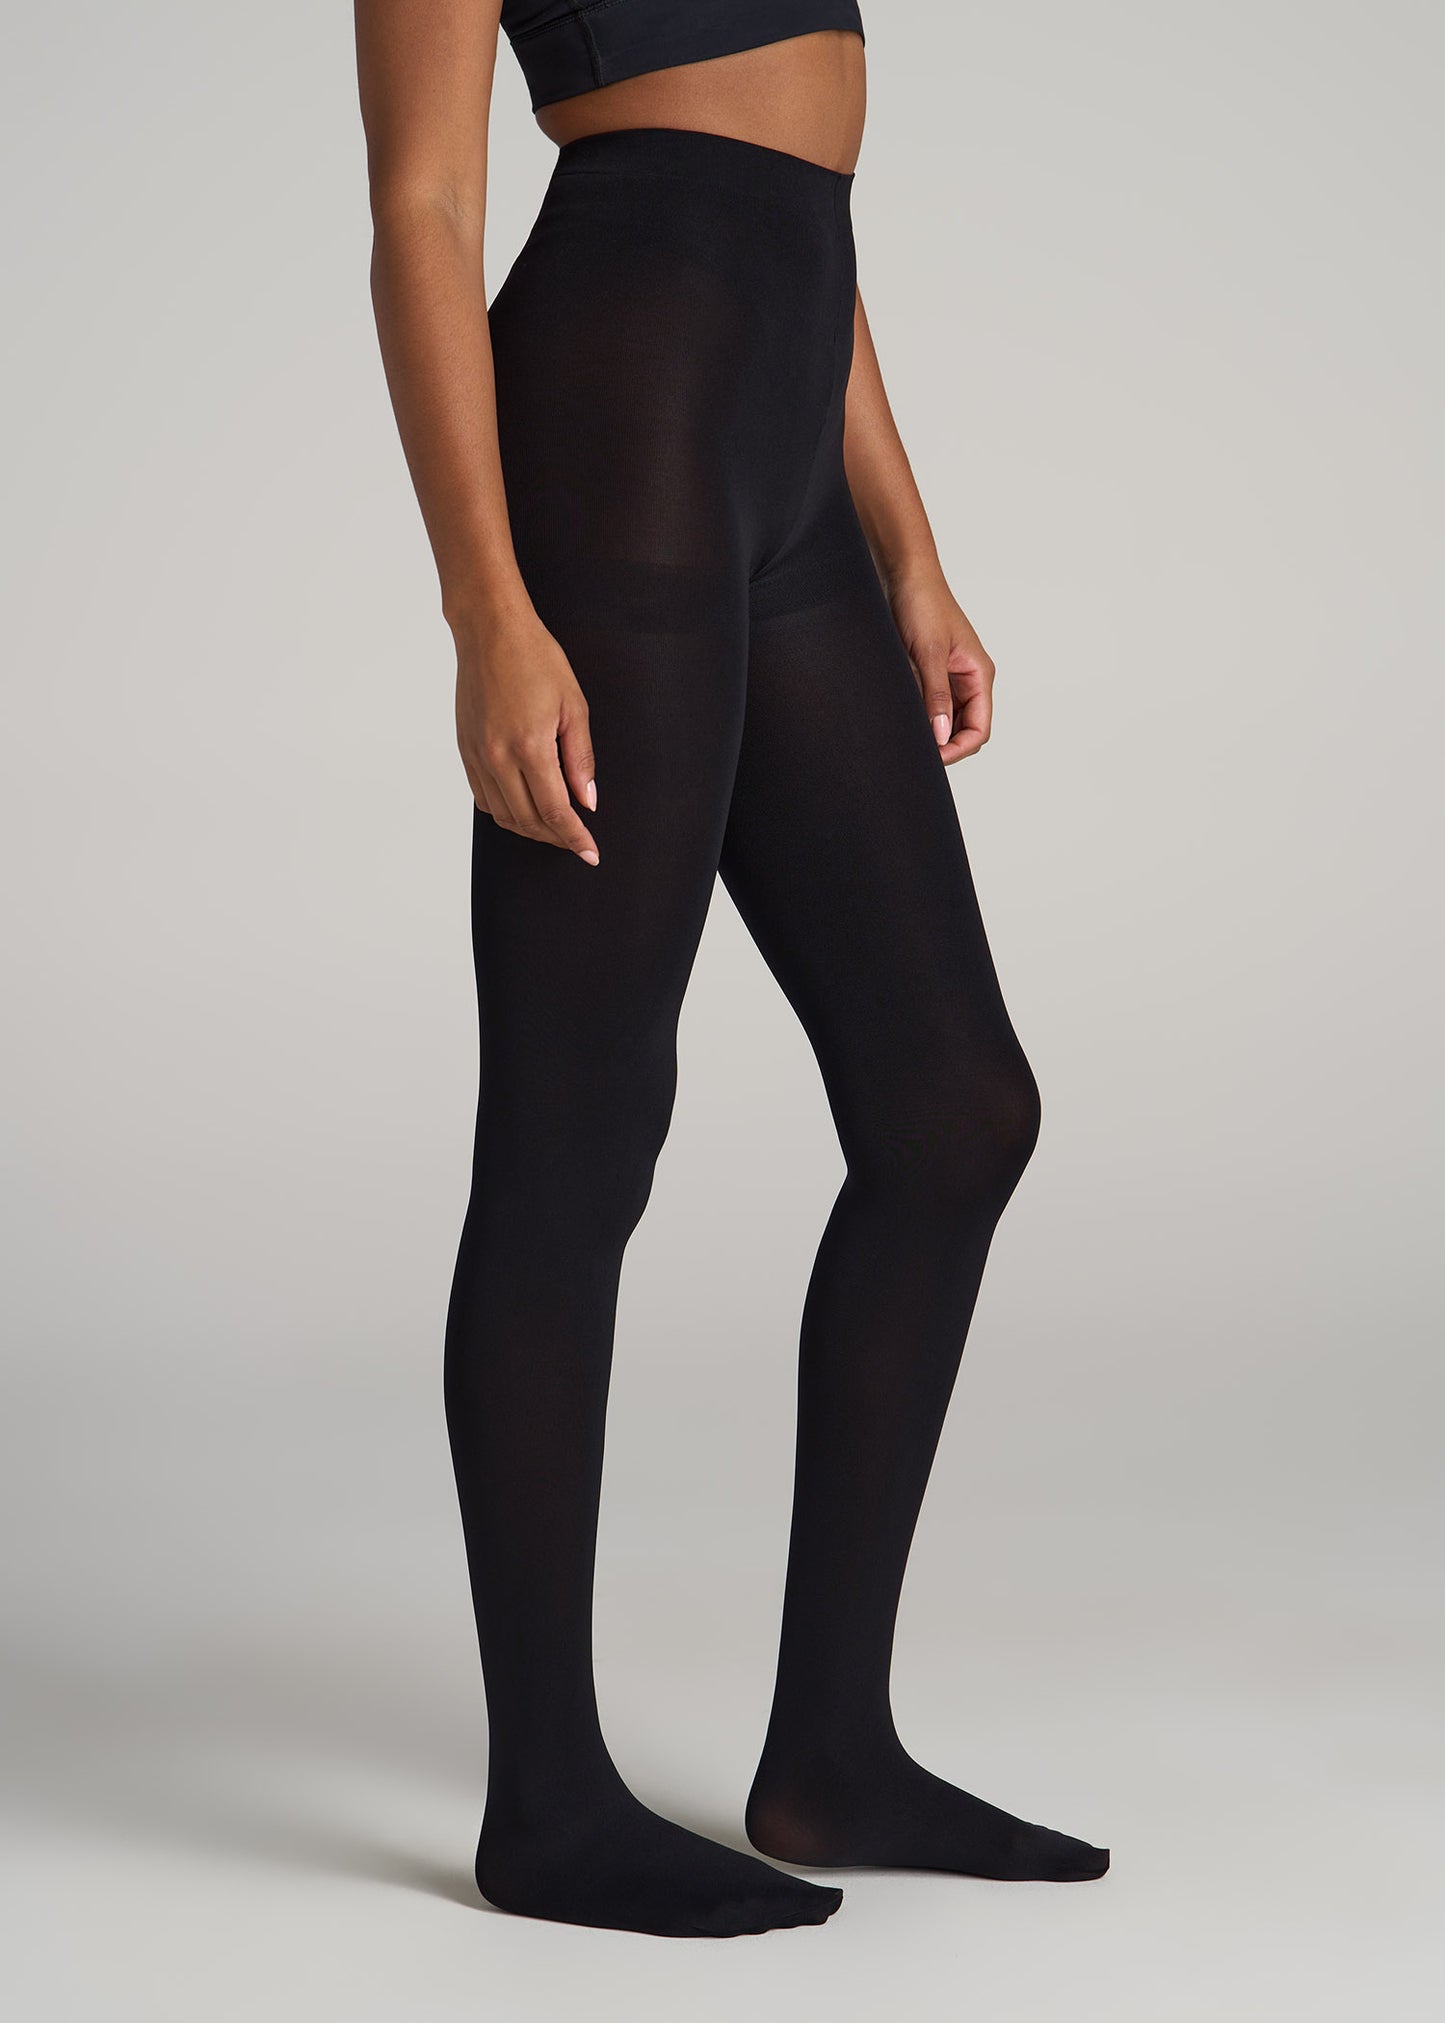 Black Tight for Tall – Better Tights